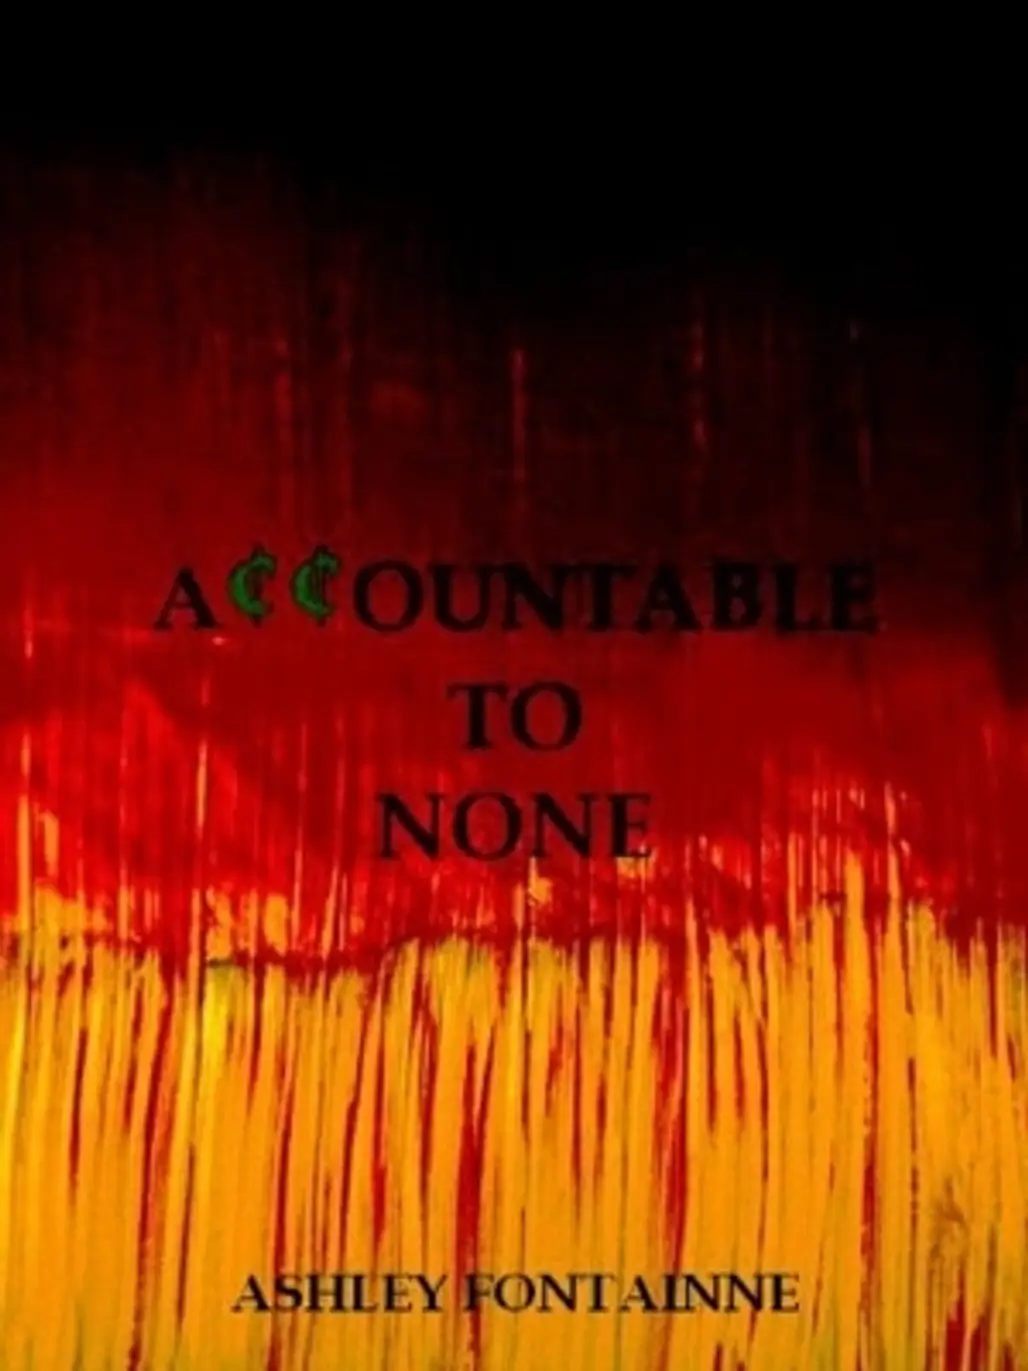 Accountable to None